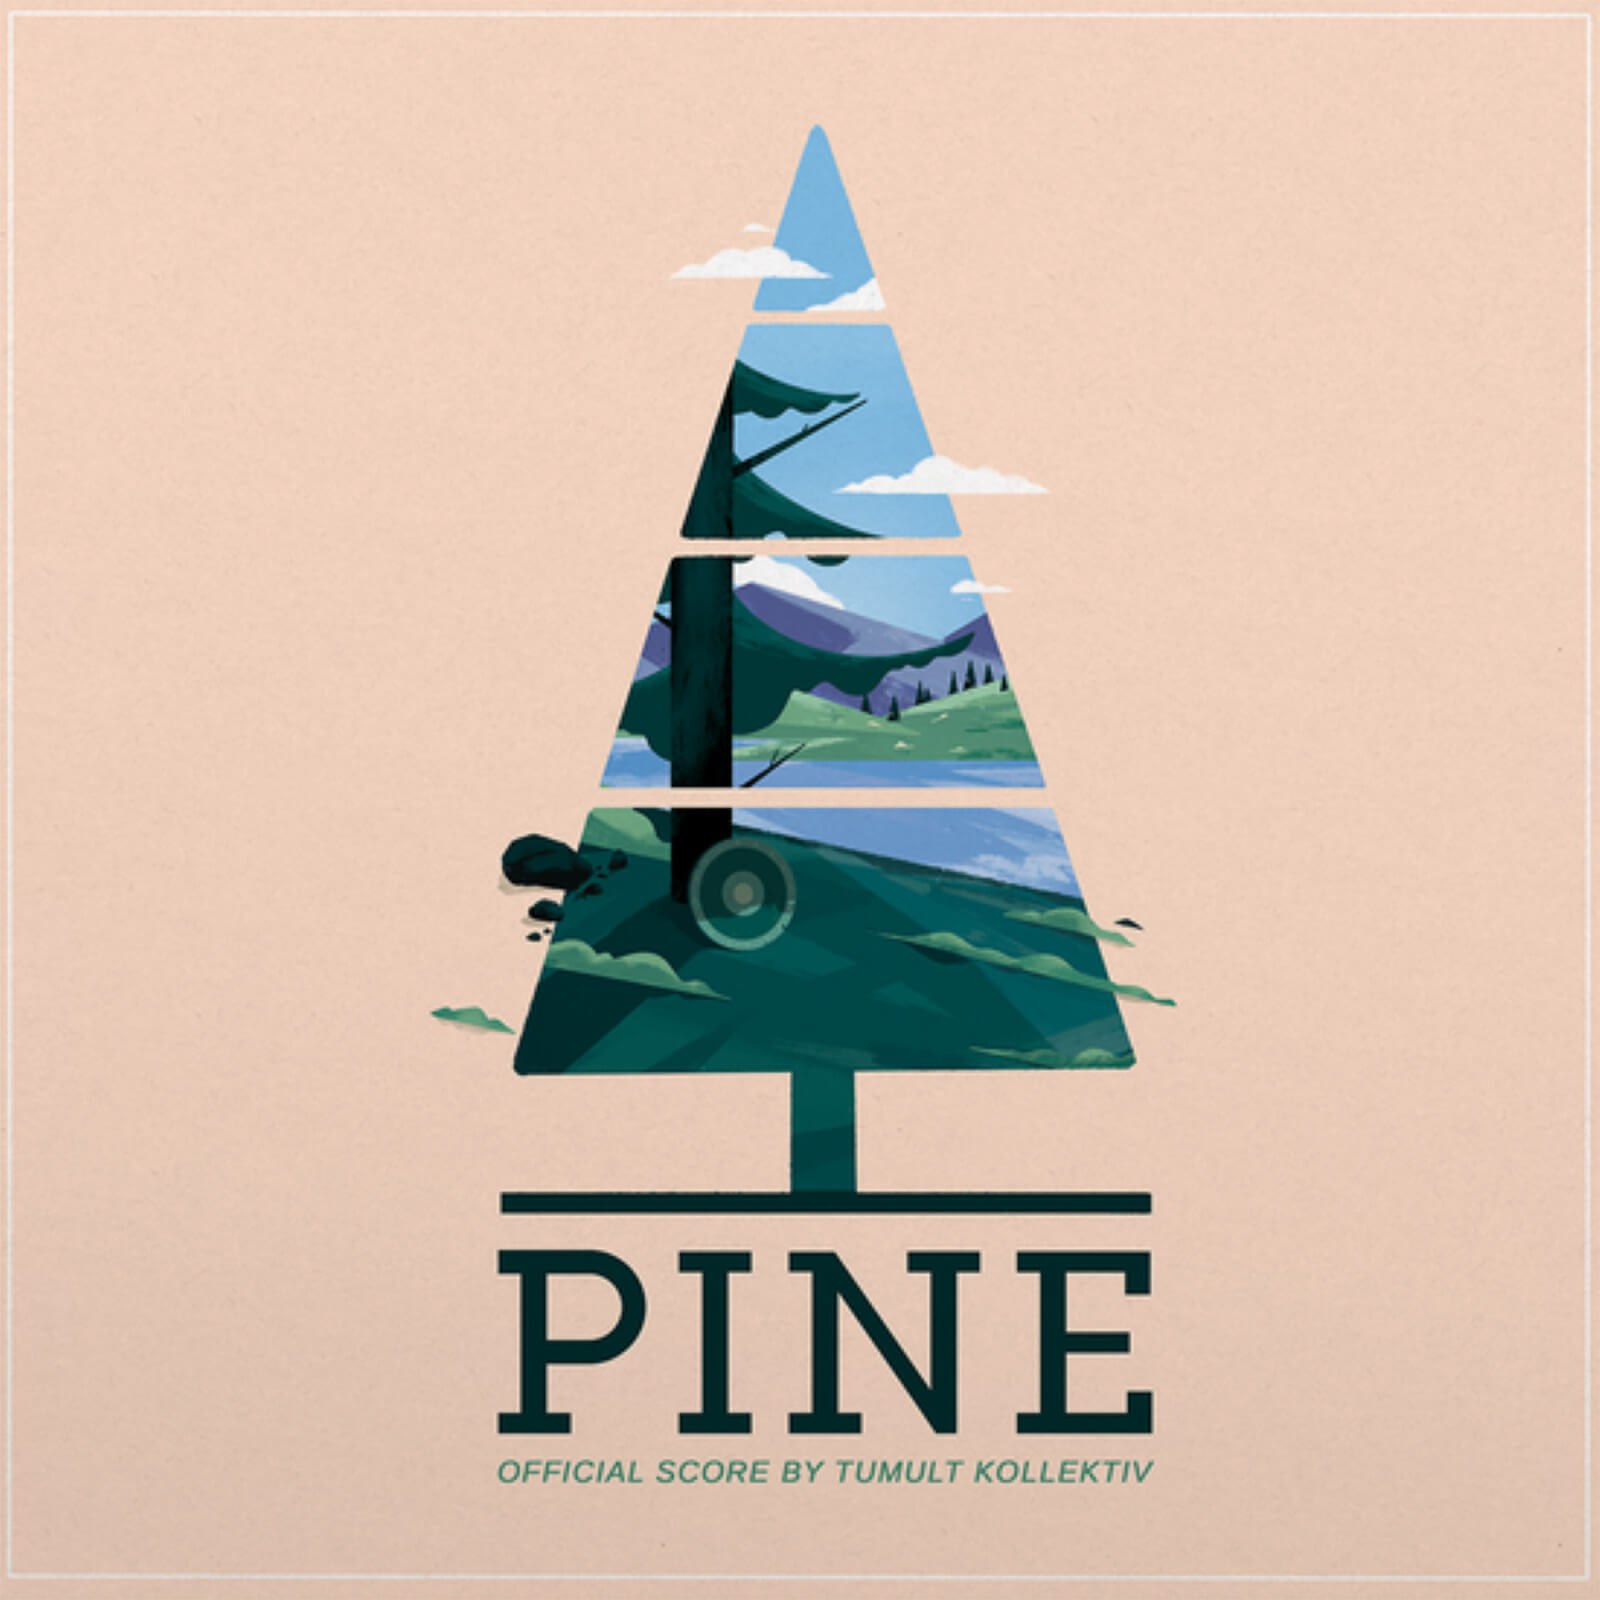 Black Screen Records - Pine (official score) 140g lp (transparent turquoise and green)